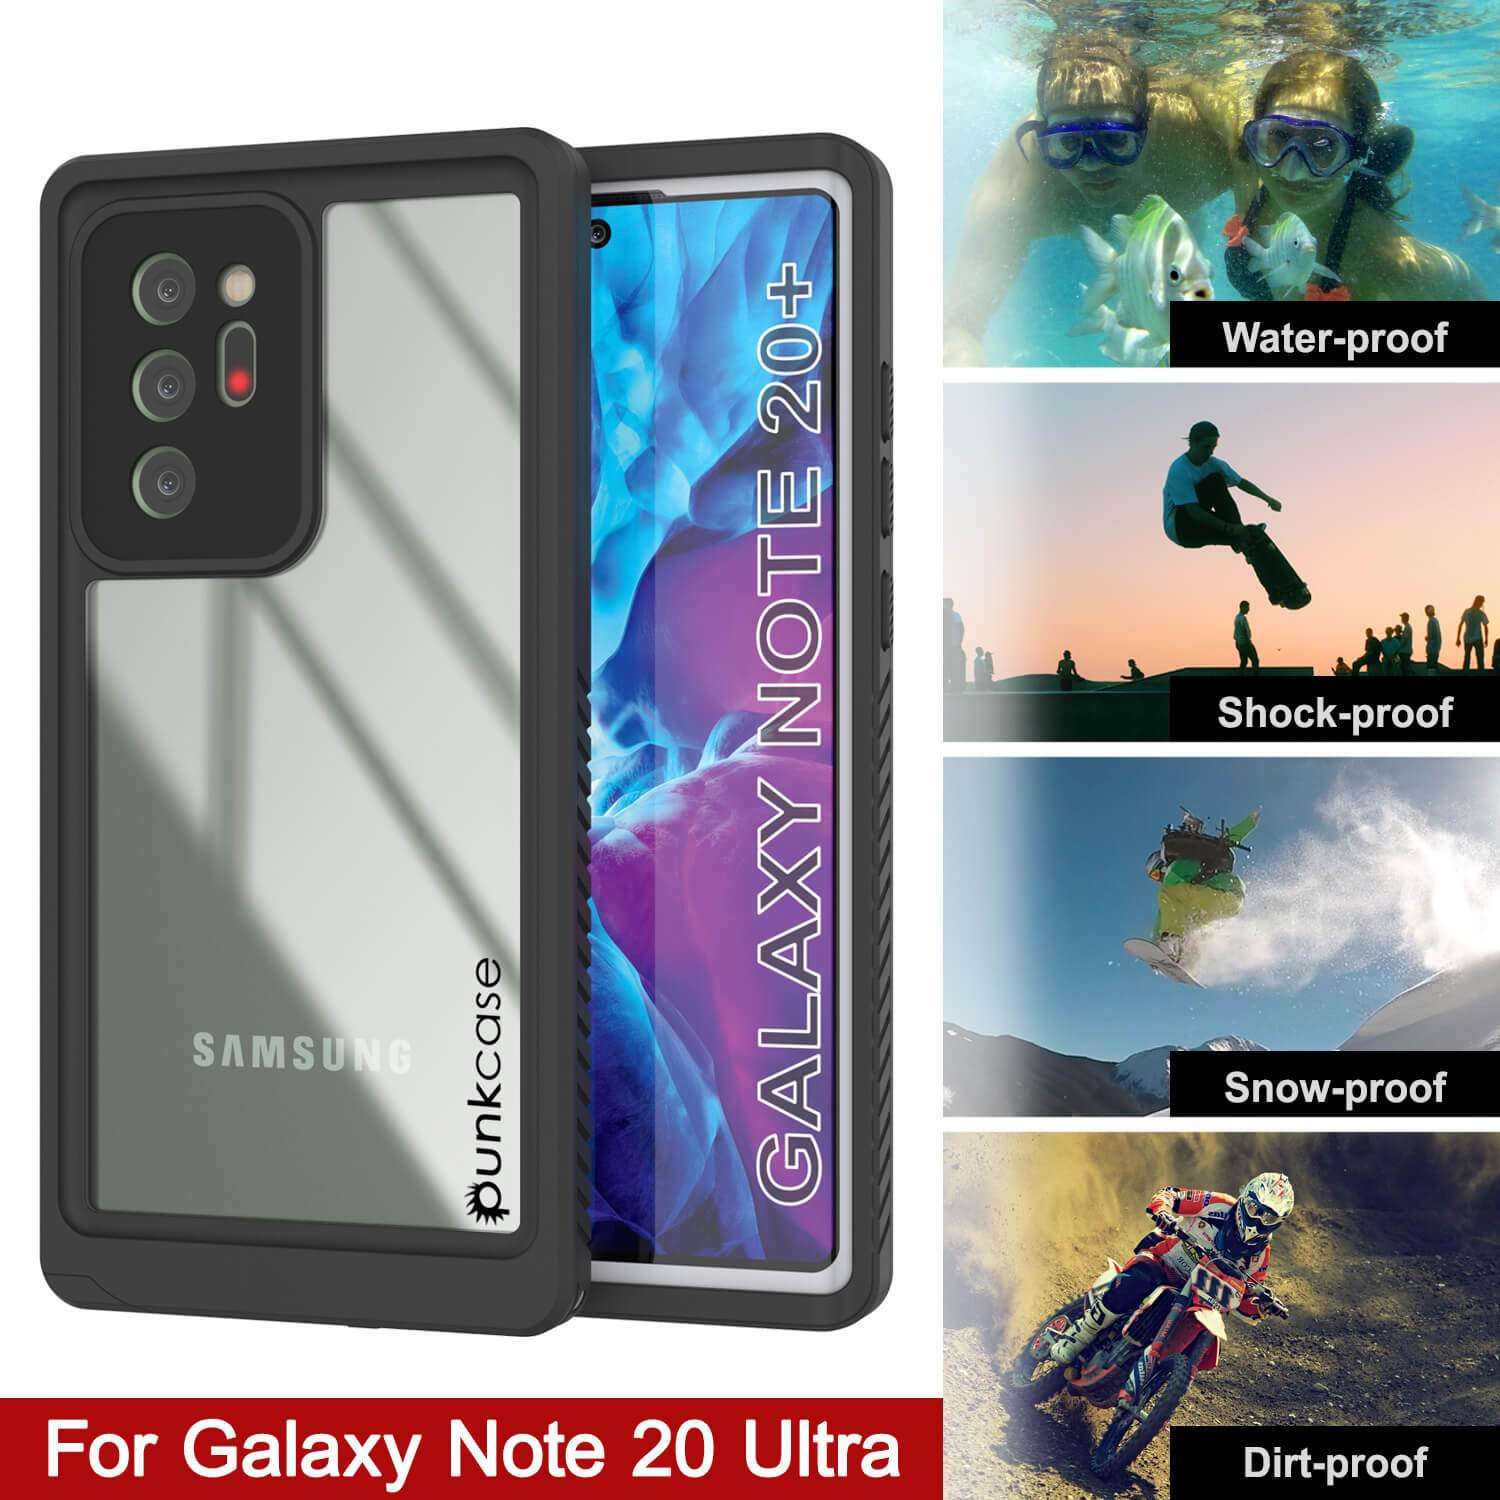 Galaxy Note 20 Ultra Case, Punkcase [Extreme Series] Armor Cover W/ Built In Screen Protector [White]